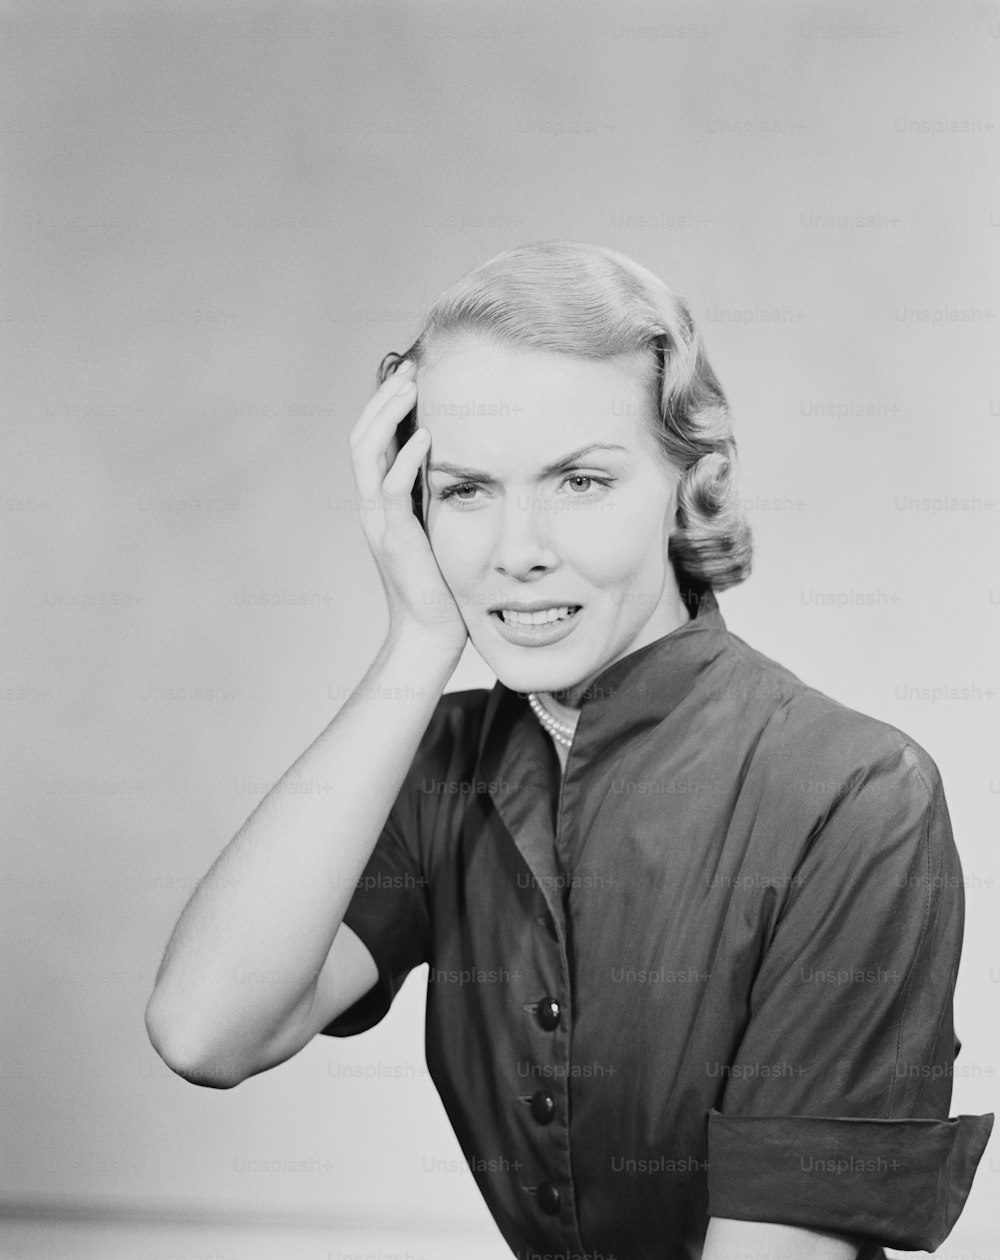 UNITED STATES - CIRCA 1950s:  Woman holding hand to her head, looking concerned.